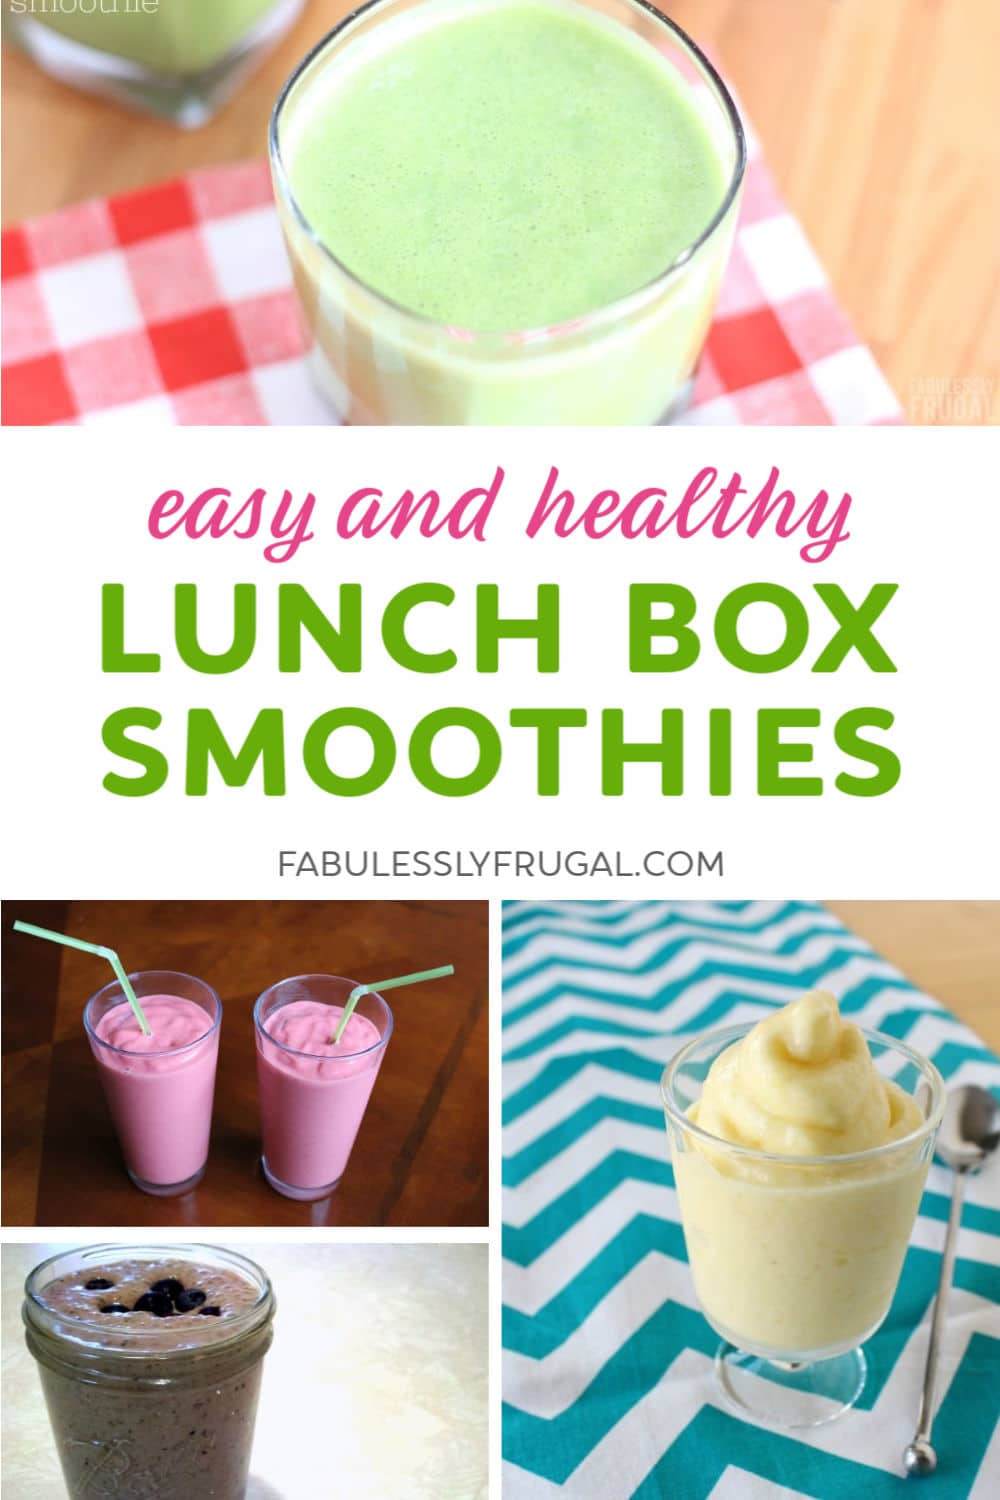 Smoothies for lunch